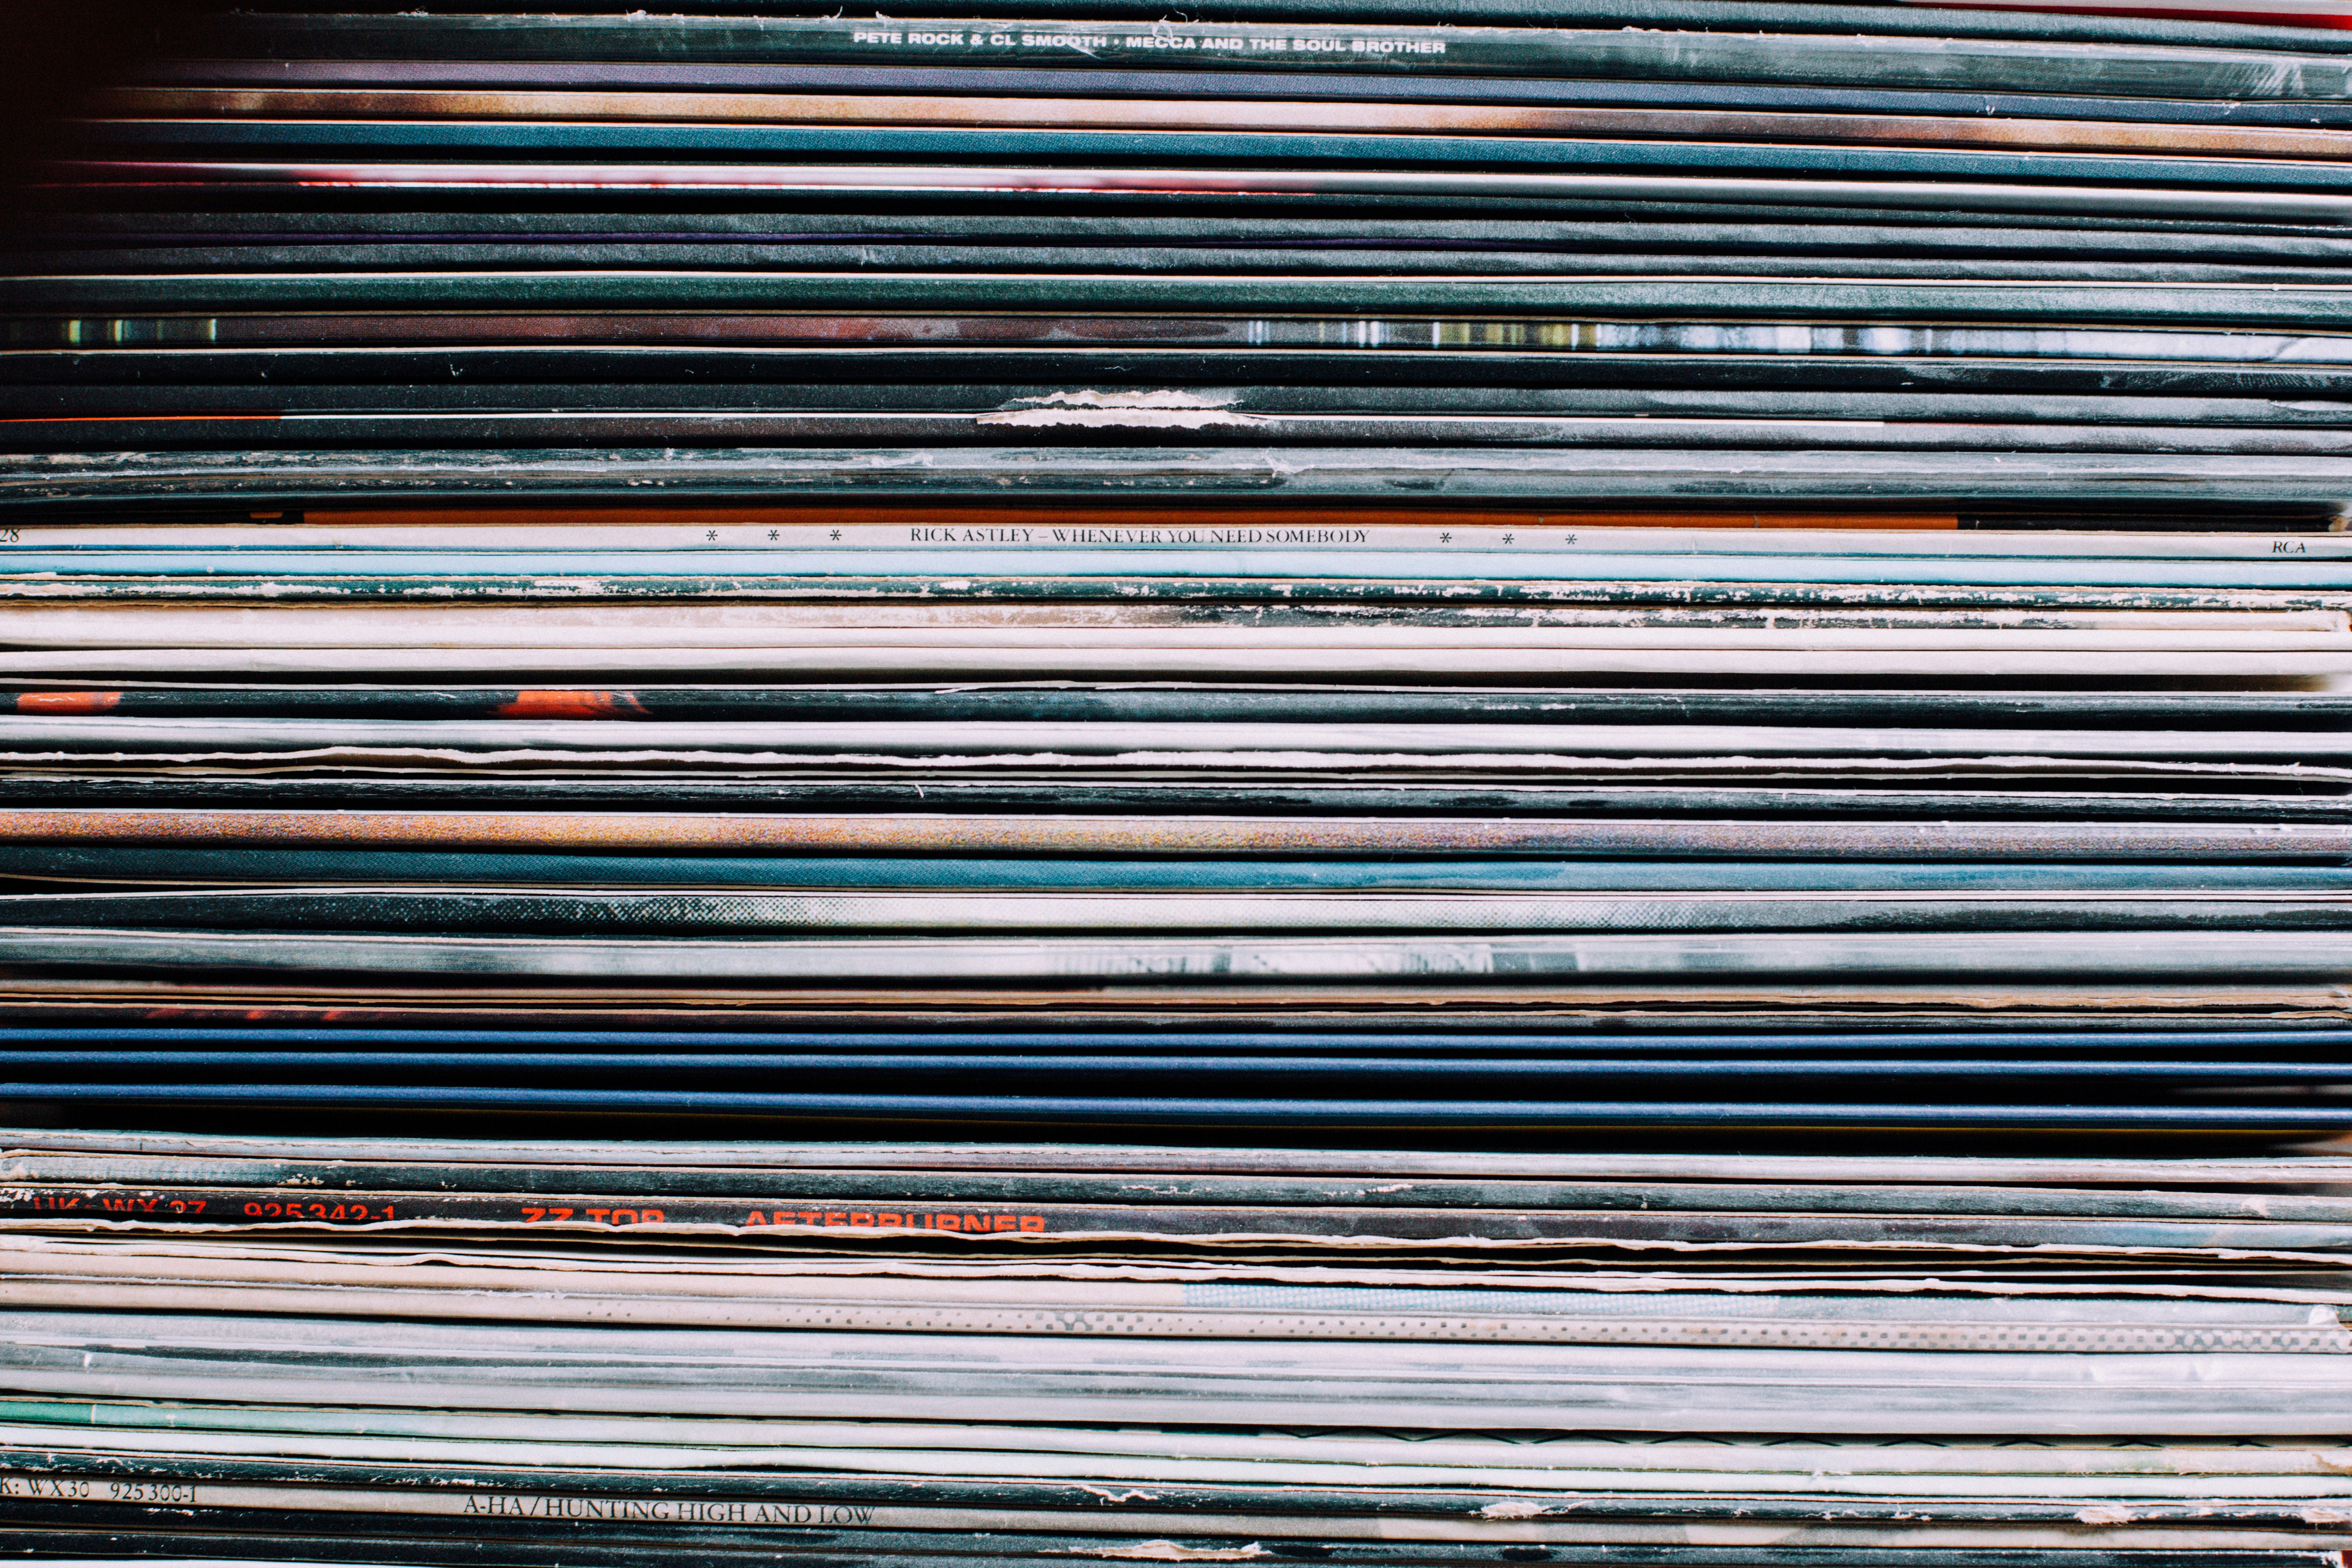 A background consisting of a stack of records in the city of Nancy, France